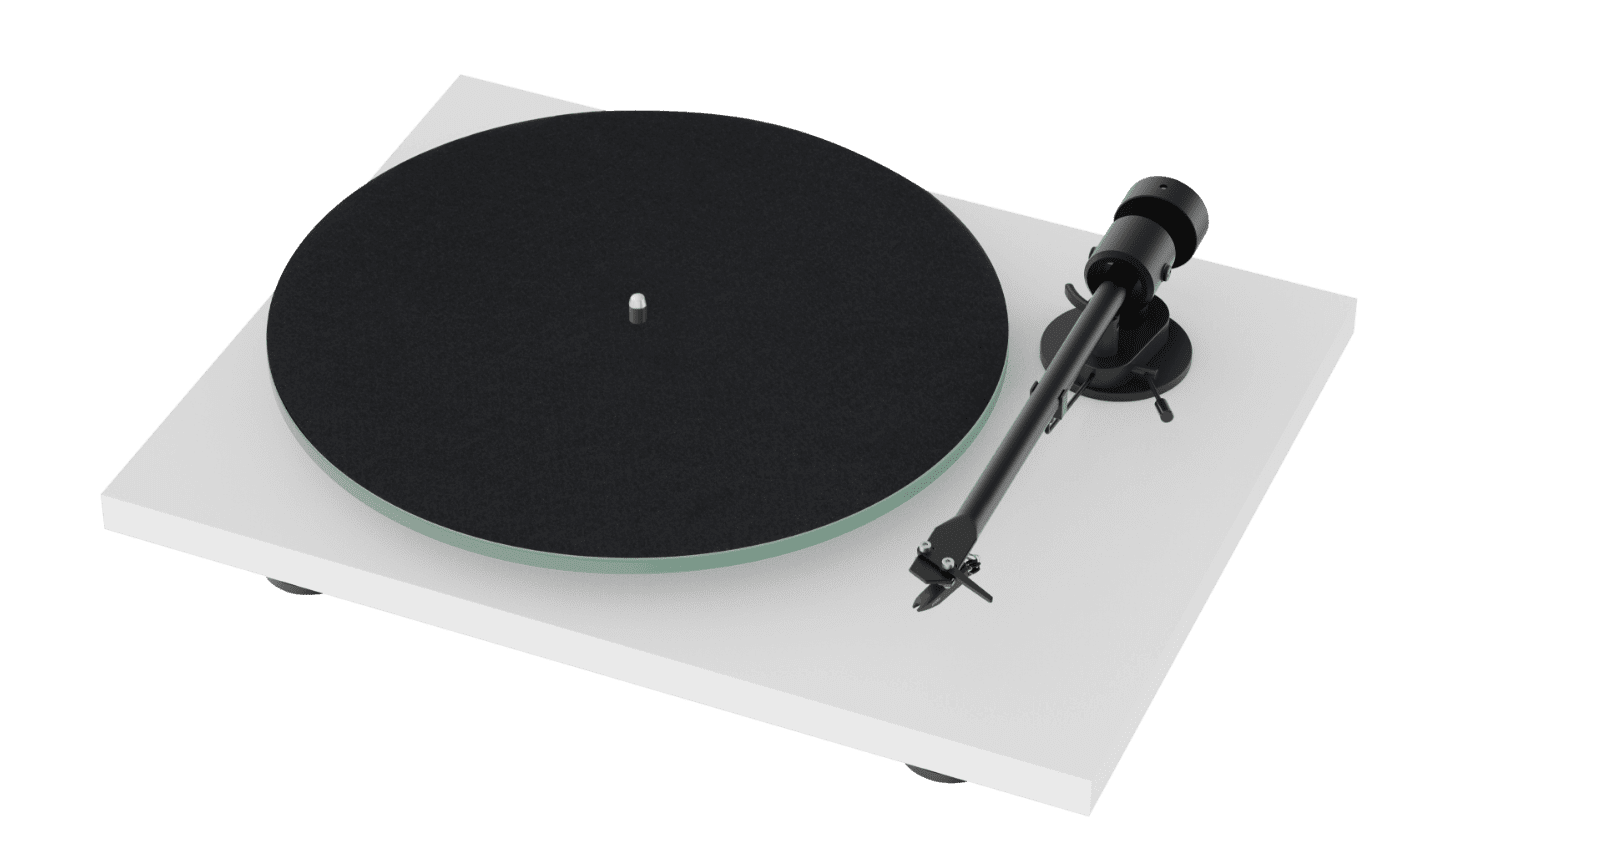 Image of a Turntable